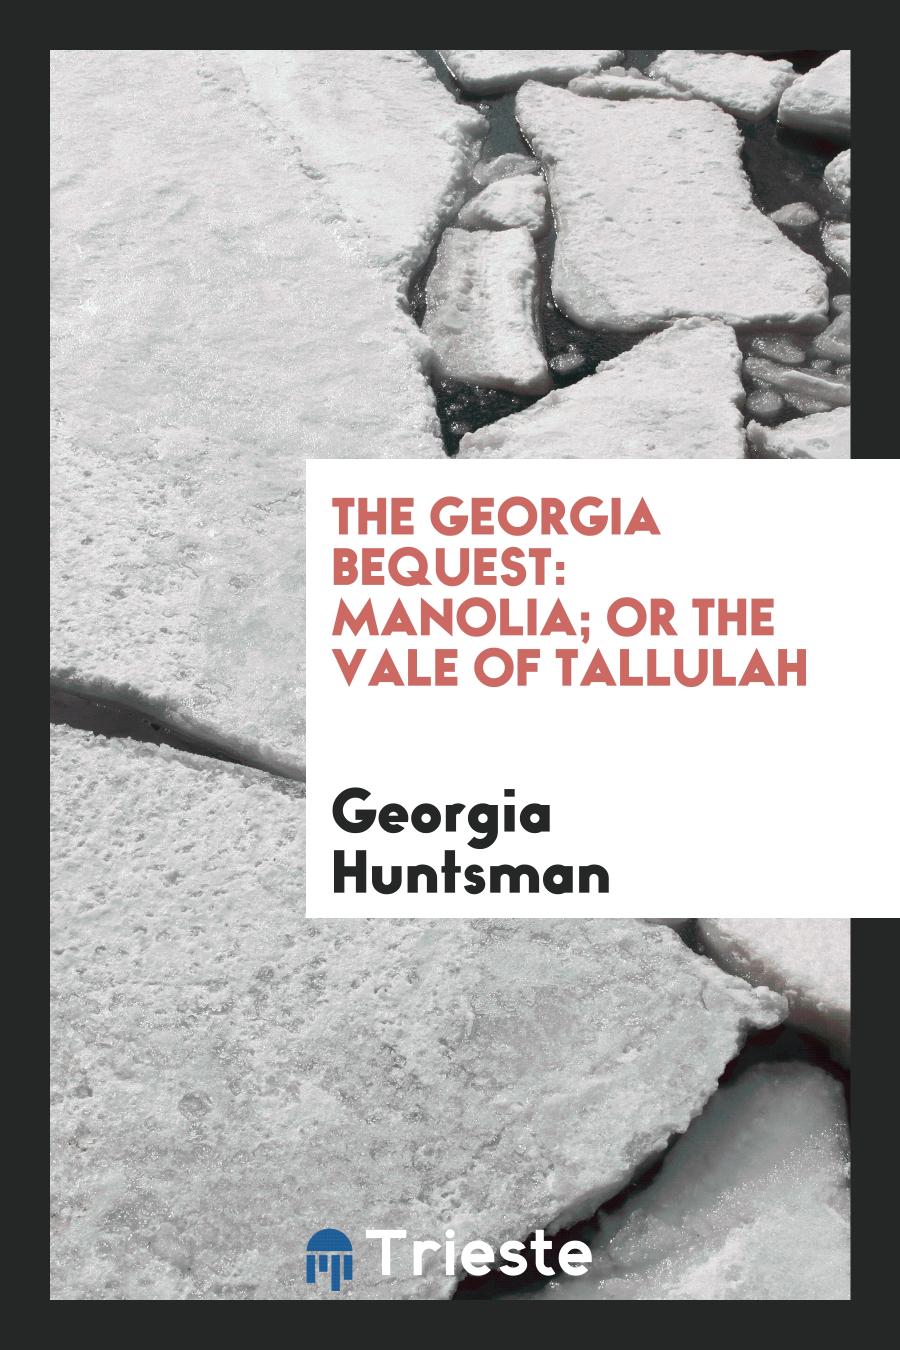 The Georgia Bequest: Manolia; Or The Vale of Tallulah